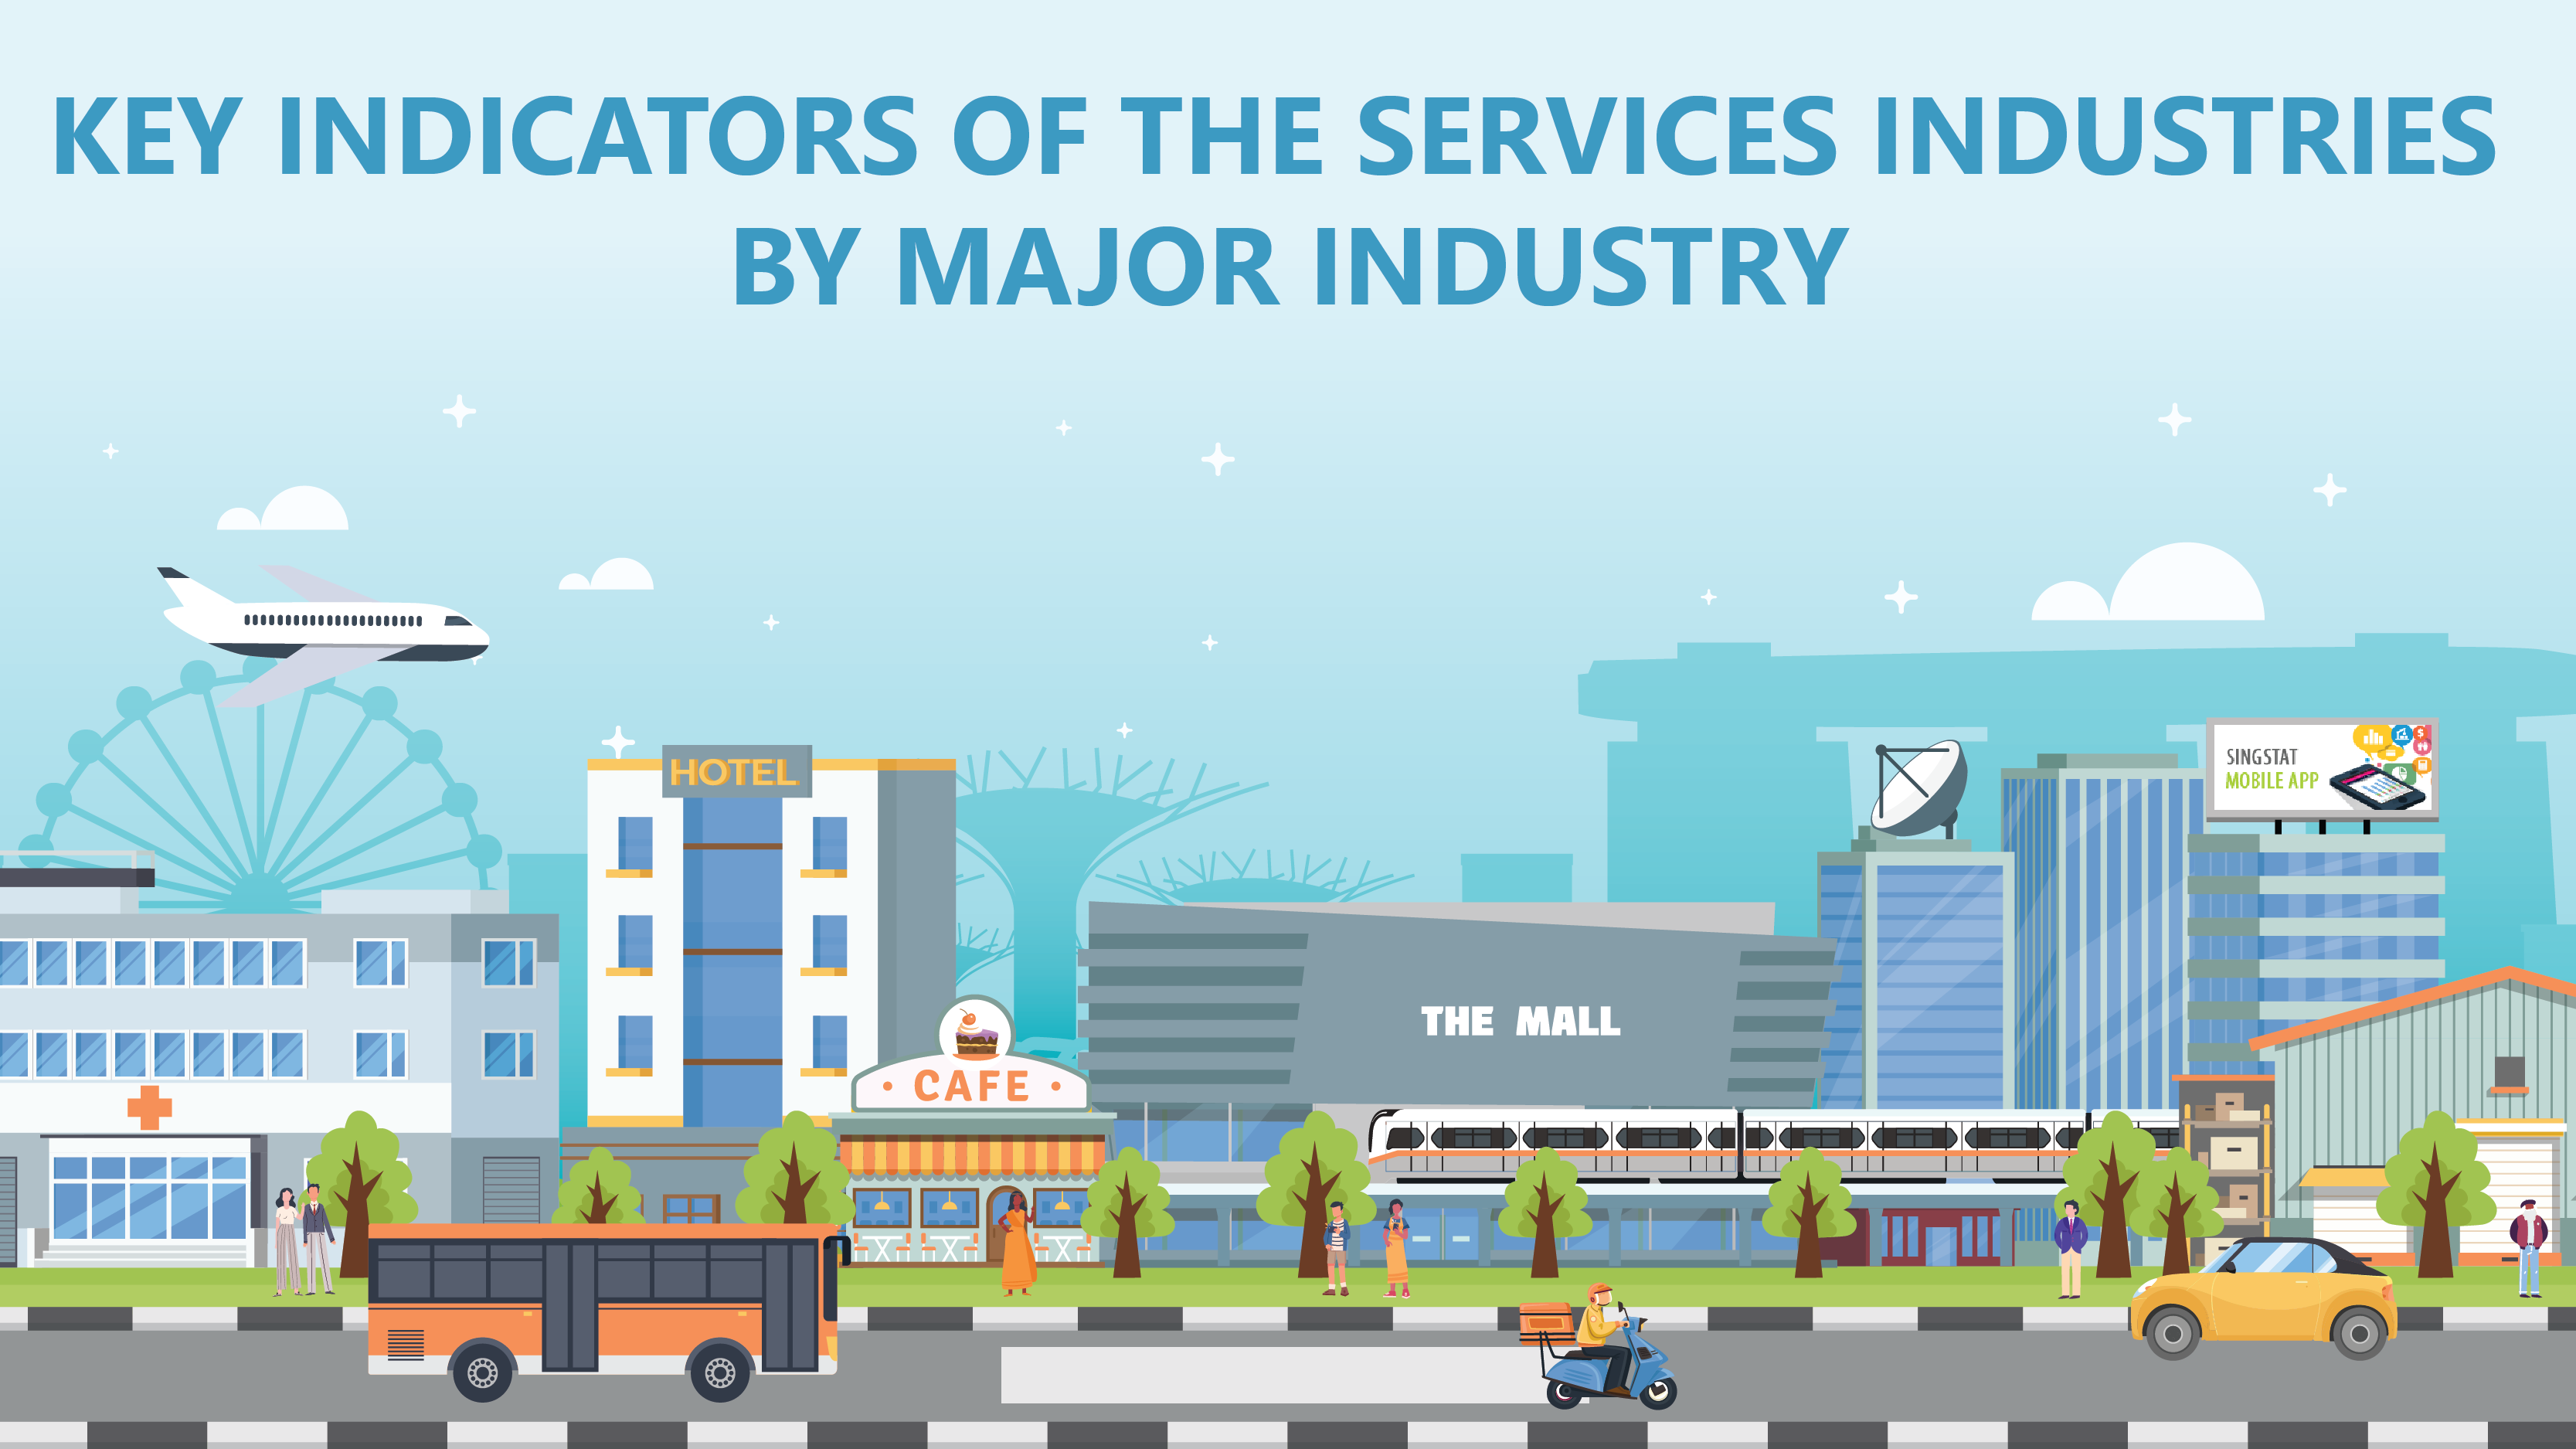 Key Indicators of the Services Industries by Major Industry